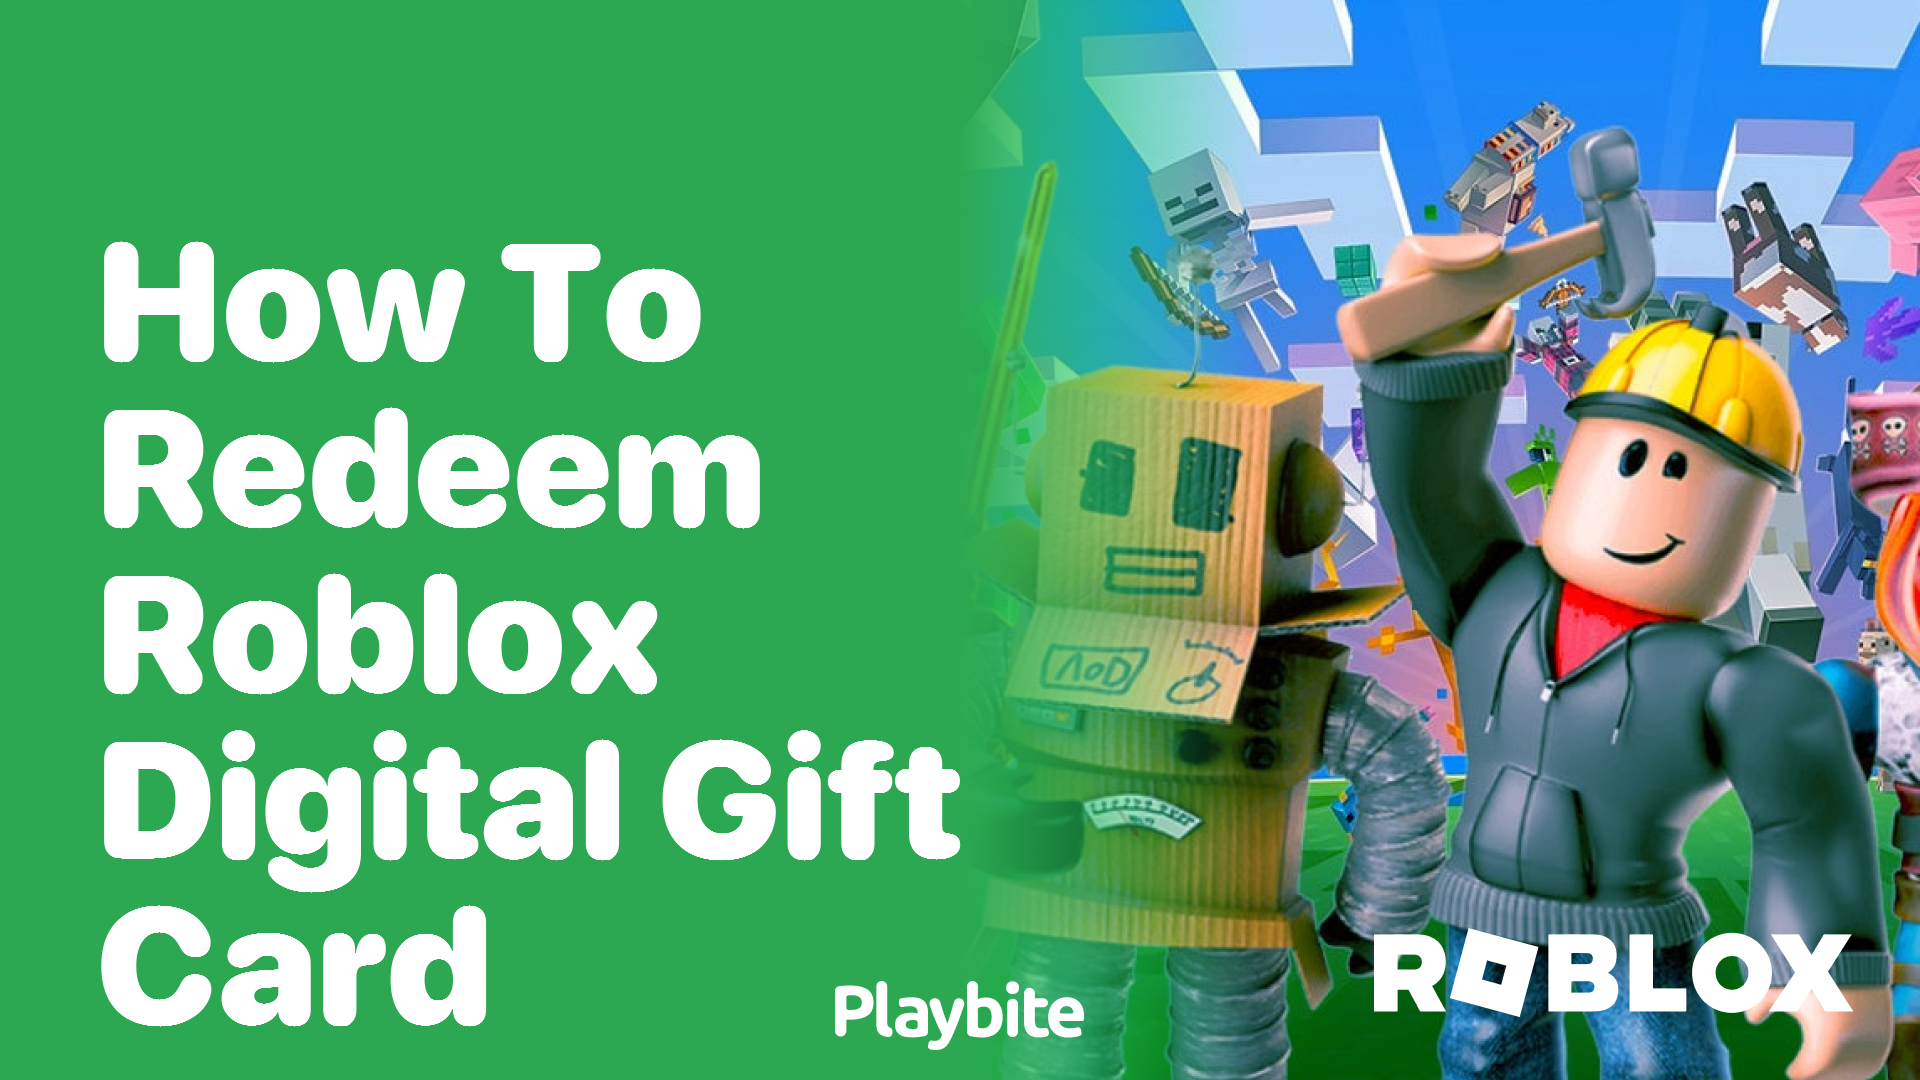 How to Redeem a Roblox Digital Gift Card